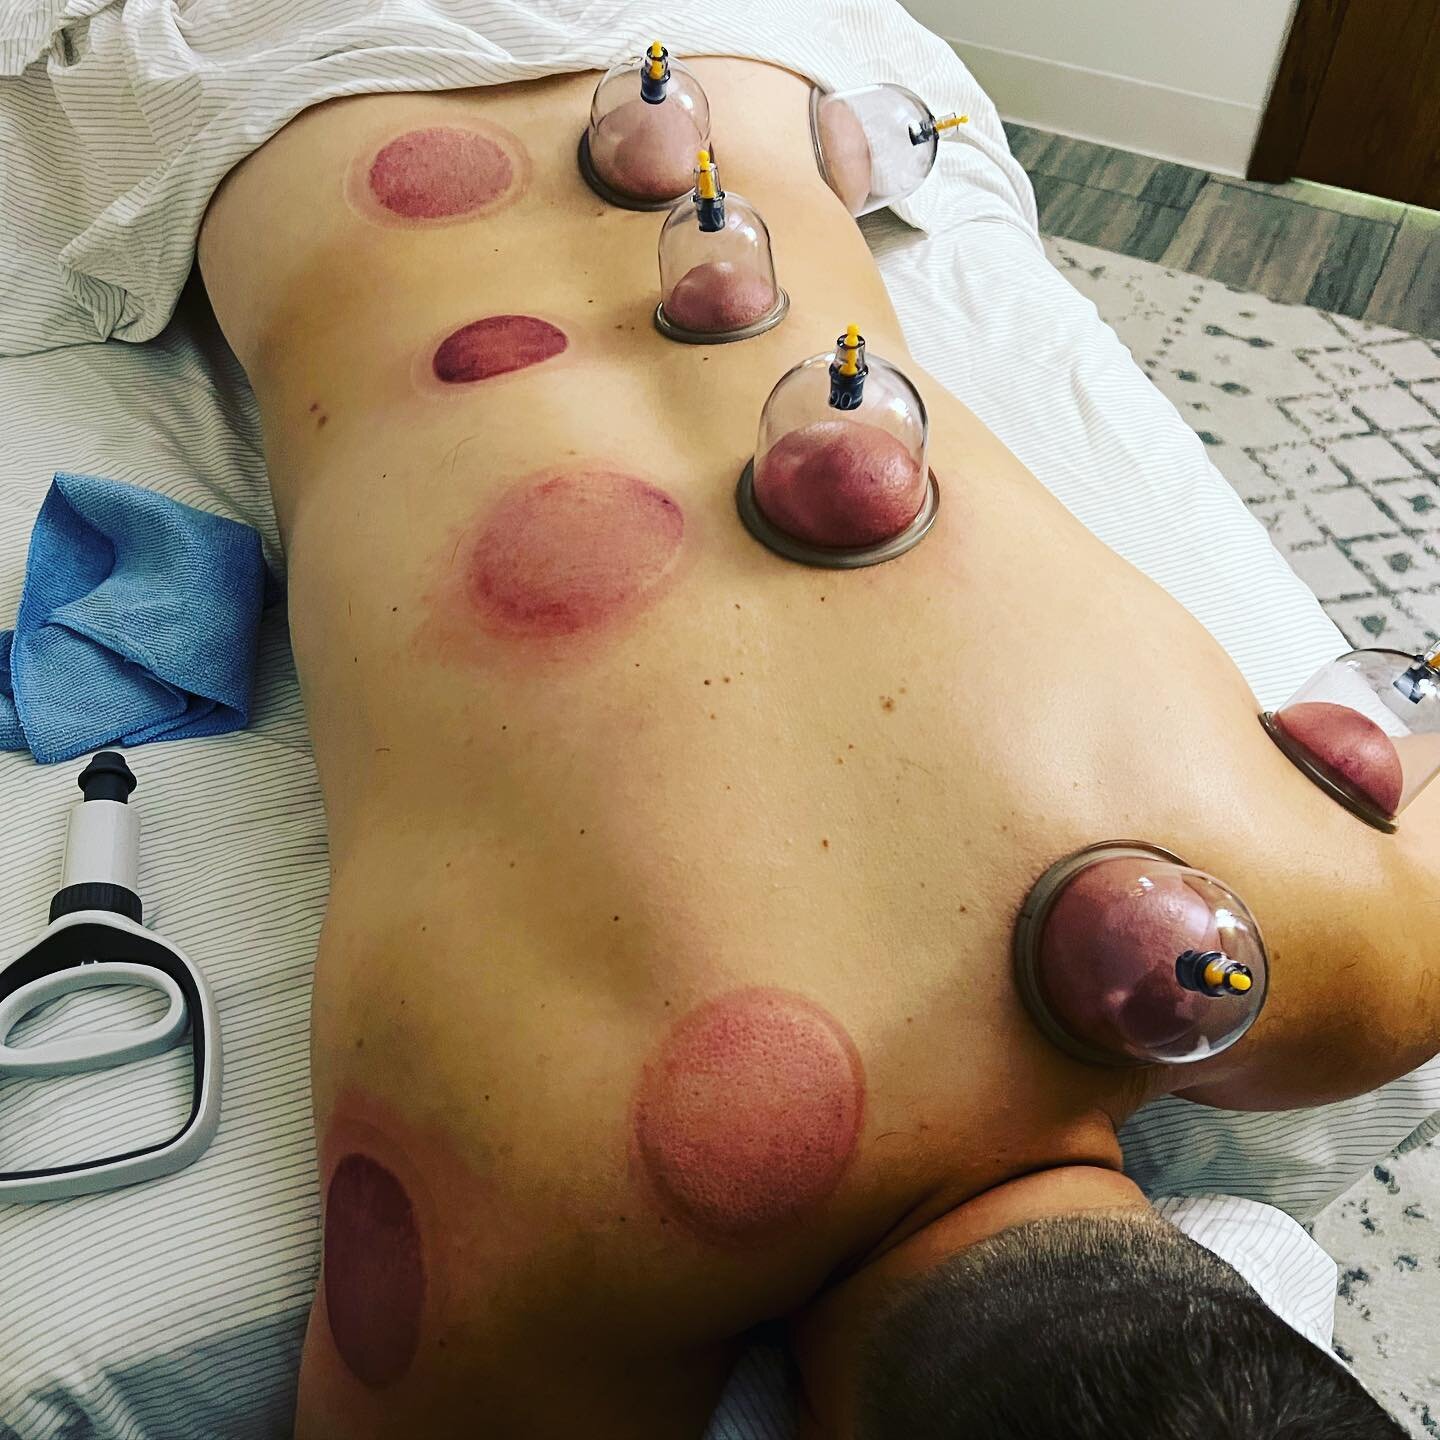 Have you tried cupping? It&rsquo;s an great add-on to a massage to help release muscle tightness and relieve pain. Check out the link in my bio for booking. #massagetherapist #cupping #massagemke #brookfield #rrmassage #lmt #painrelief #bookwithme